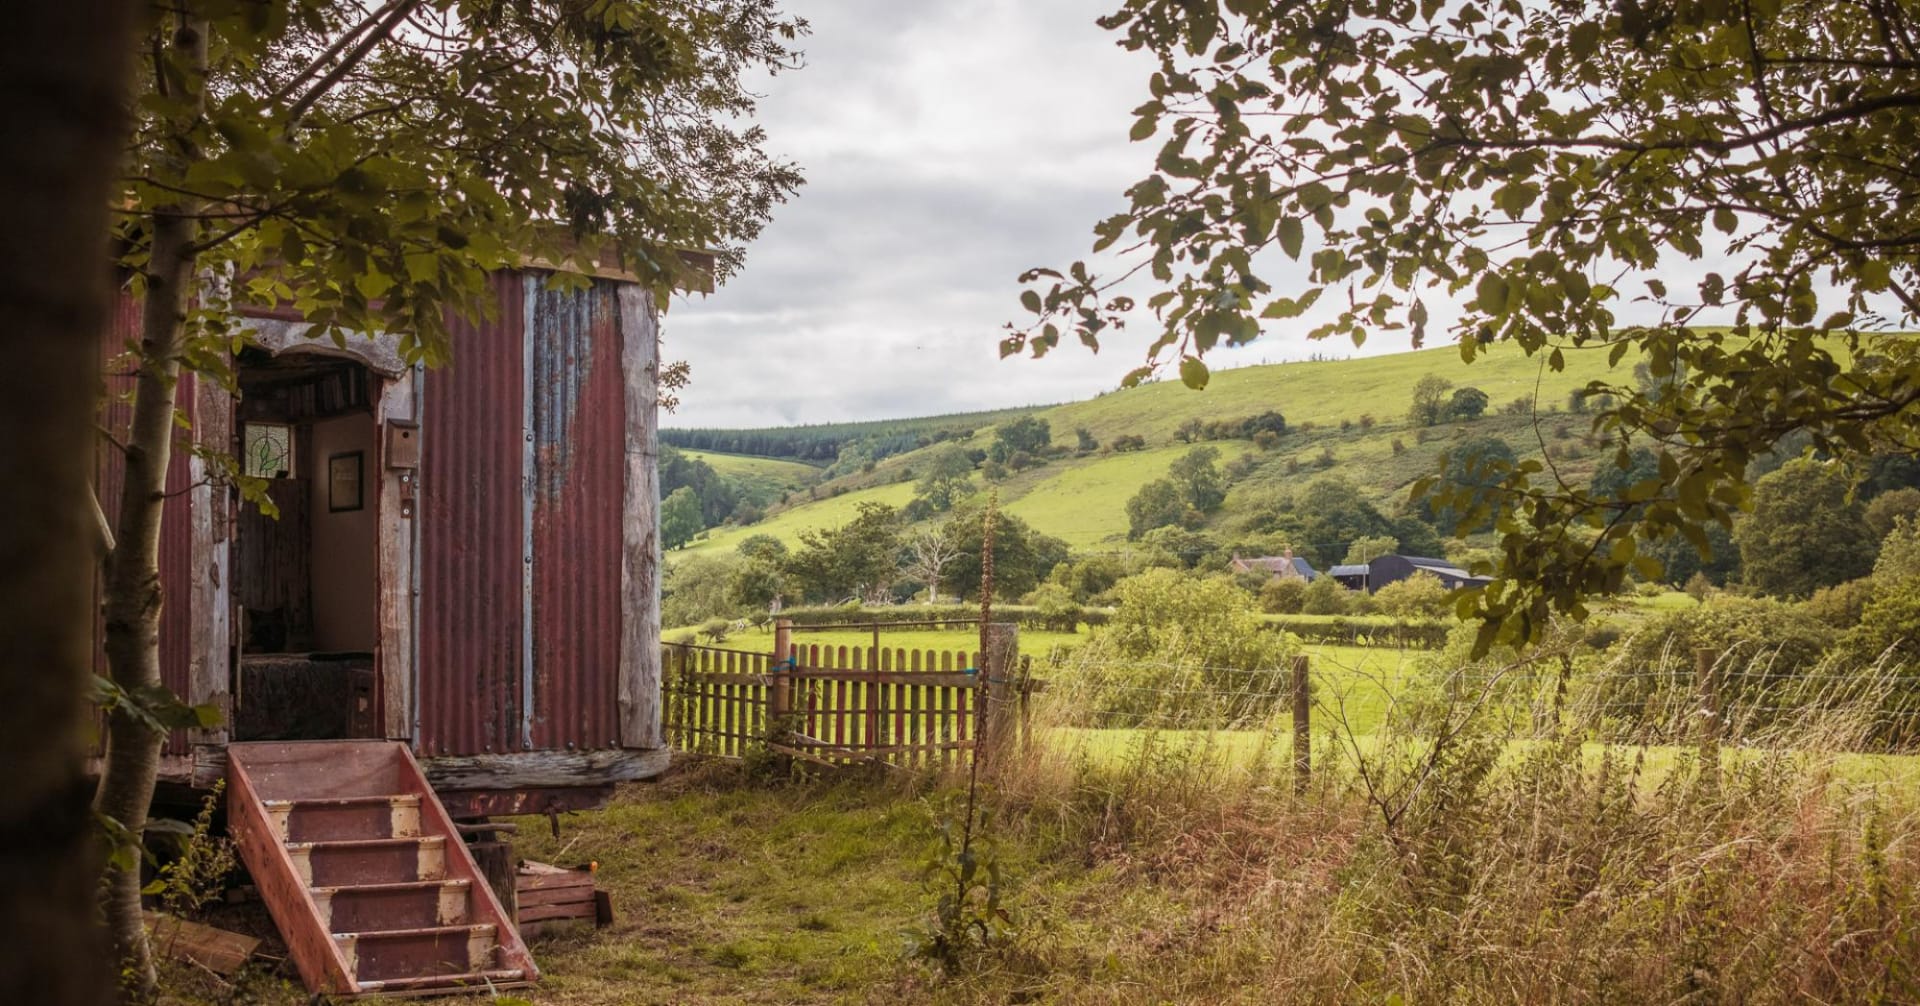 Hamperley Hideaways in Shropshire is home to 10 wild camping pitches and an off-grid hut.